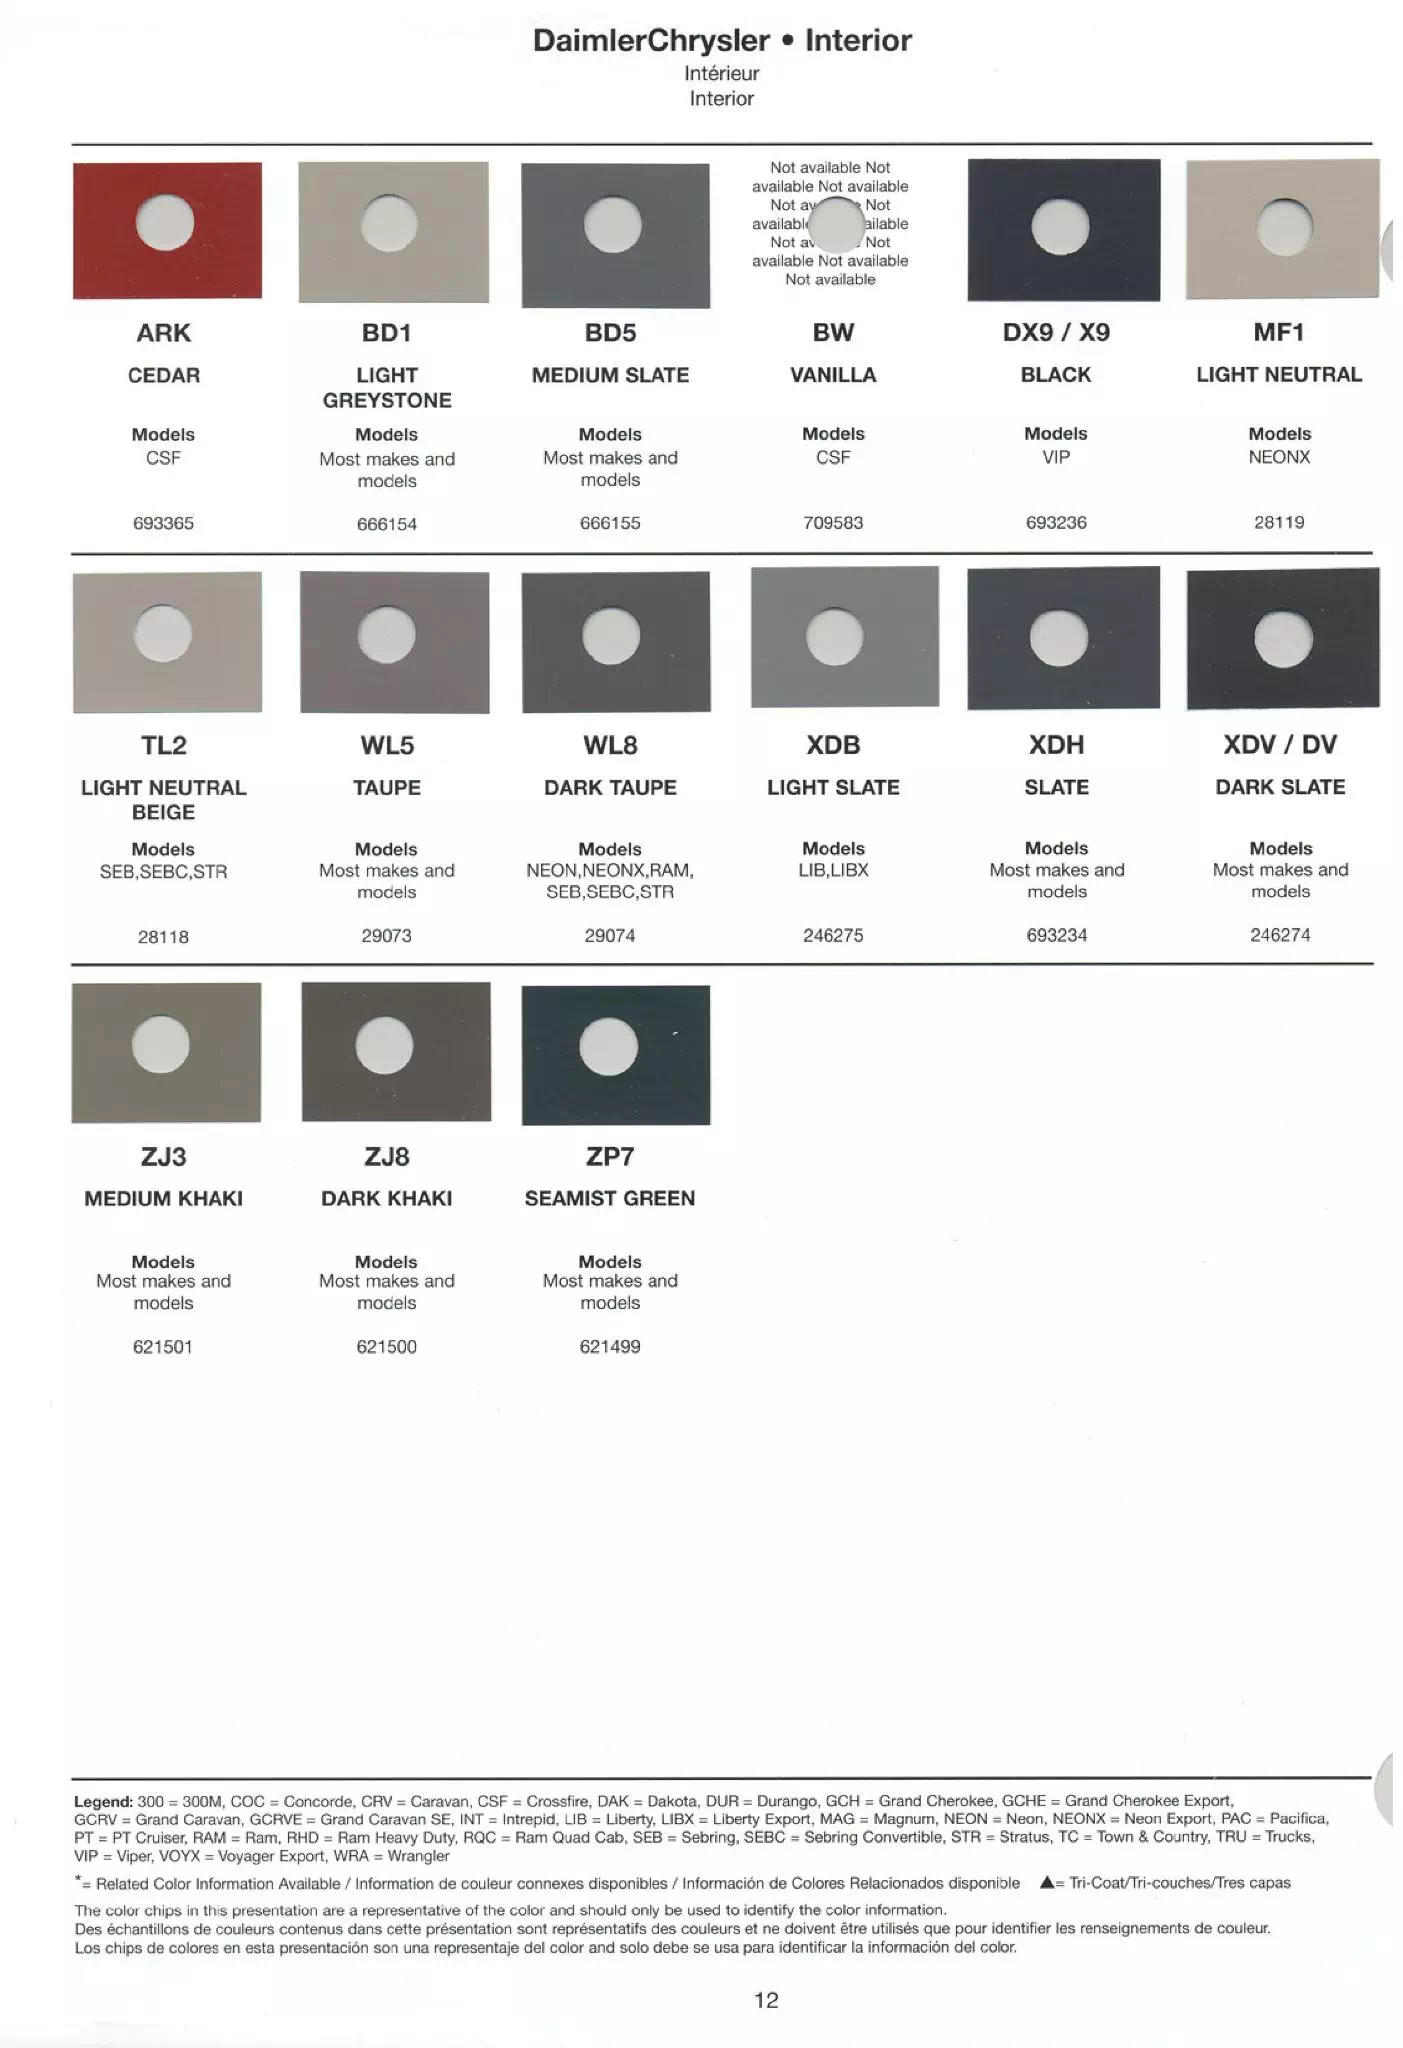 Interior Paint Codes and Color Swatches